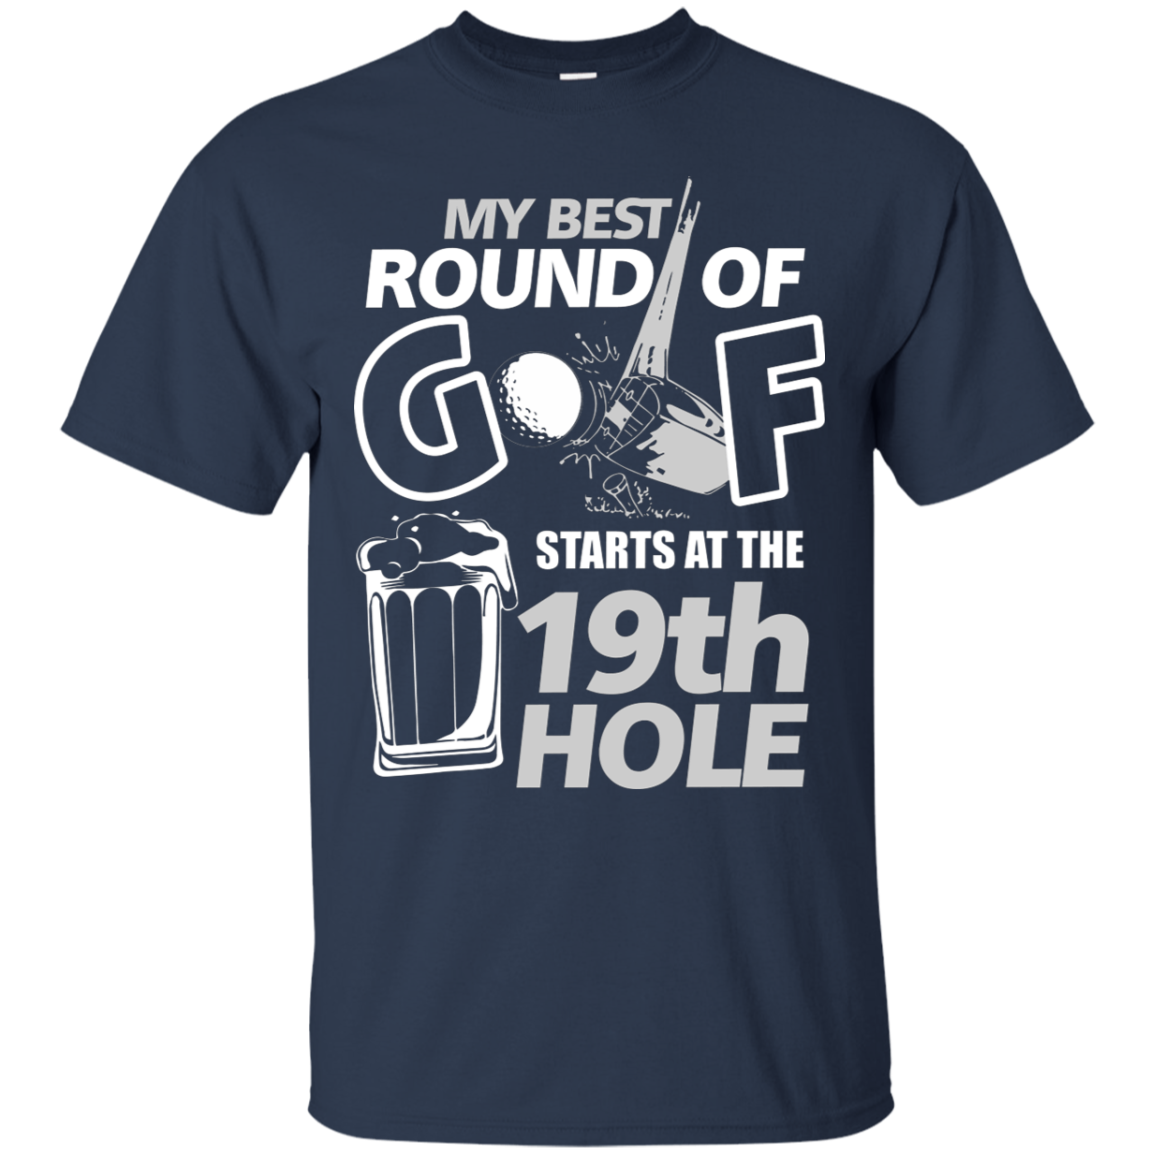 My Best Round Of Golf Starts At The 19th Hole v2.0 T-Shirt Apparel - The Beer Lodge